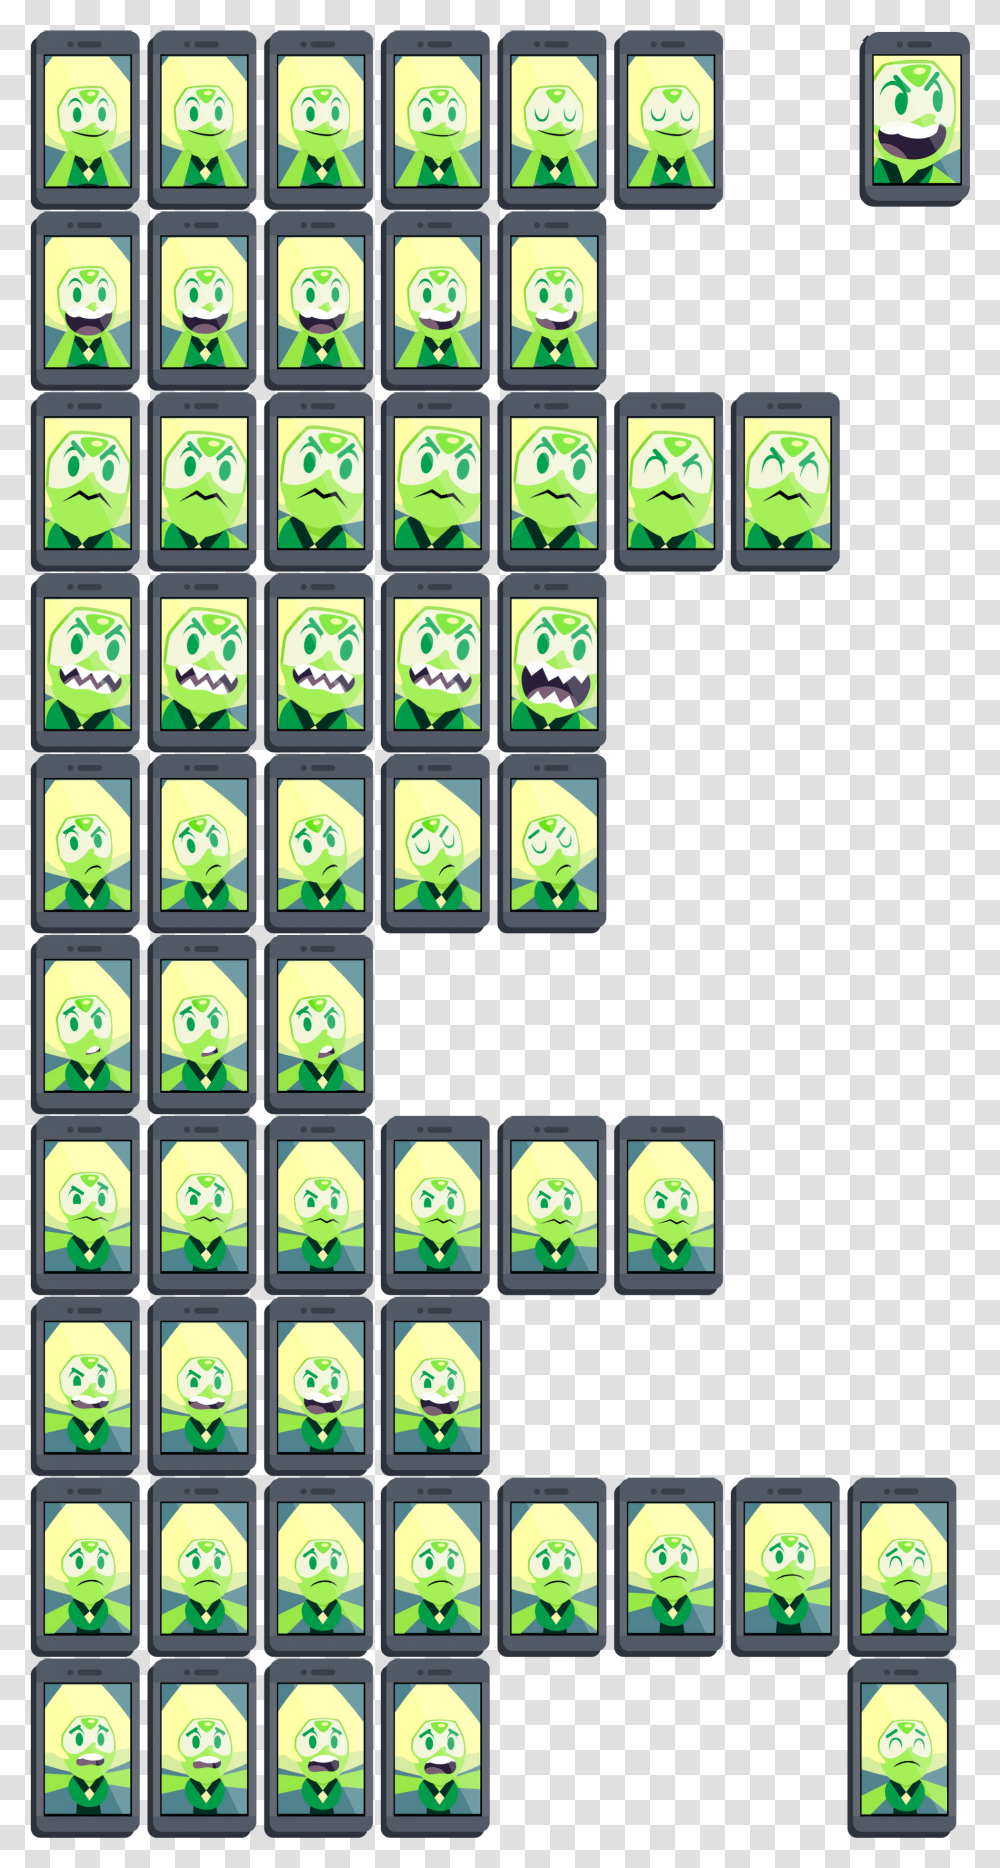 Peridot Steven Universe Sprite Sheet, Interior Design, Indoors, Stained Glass Transparent Png